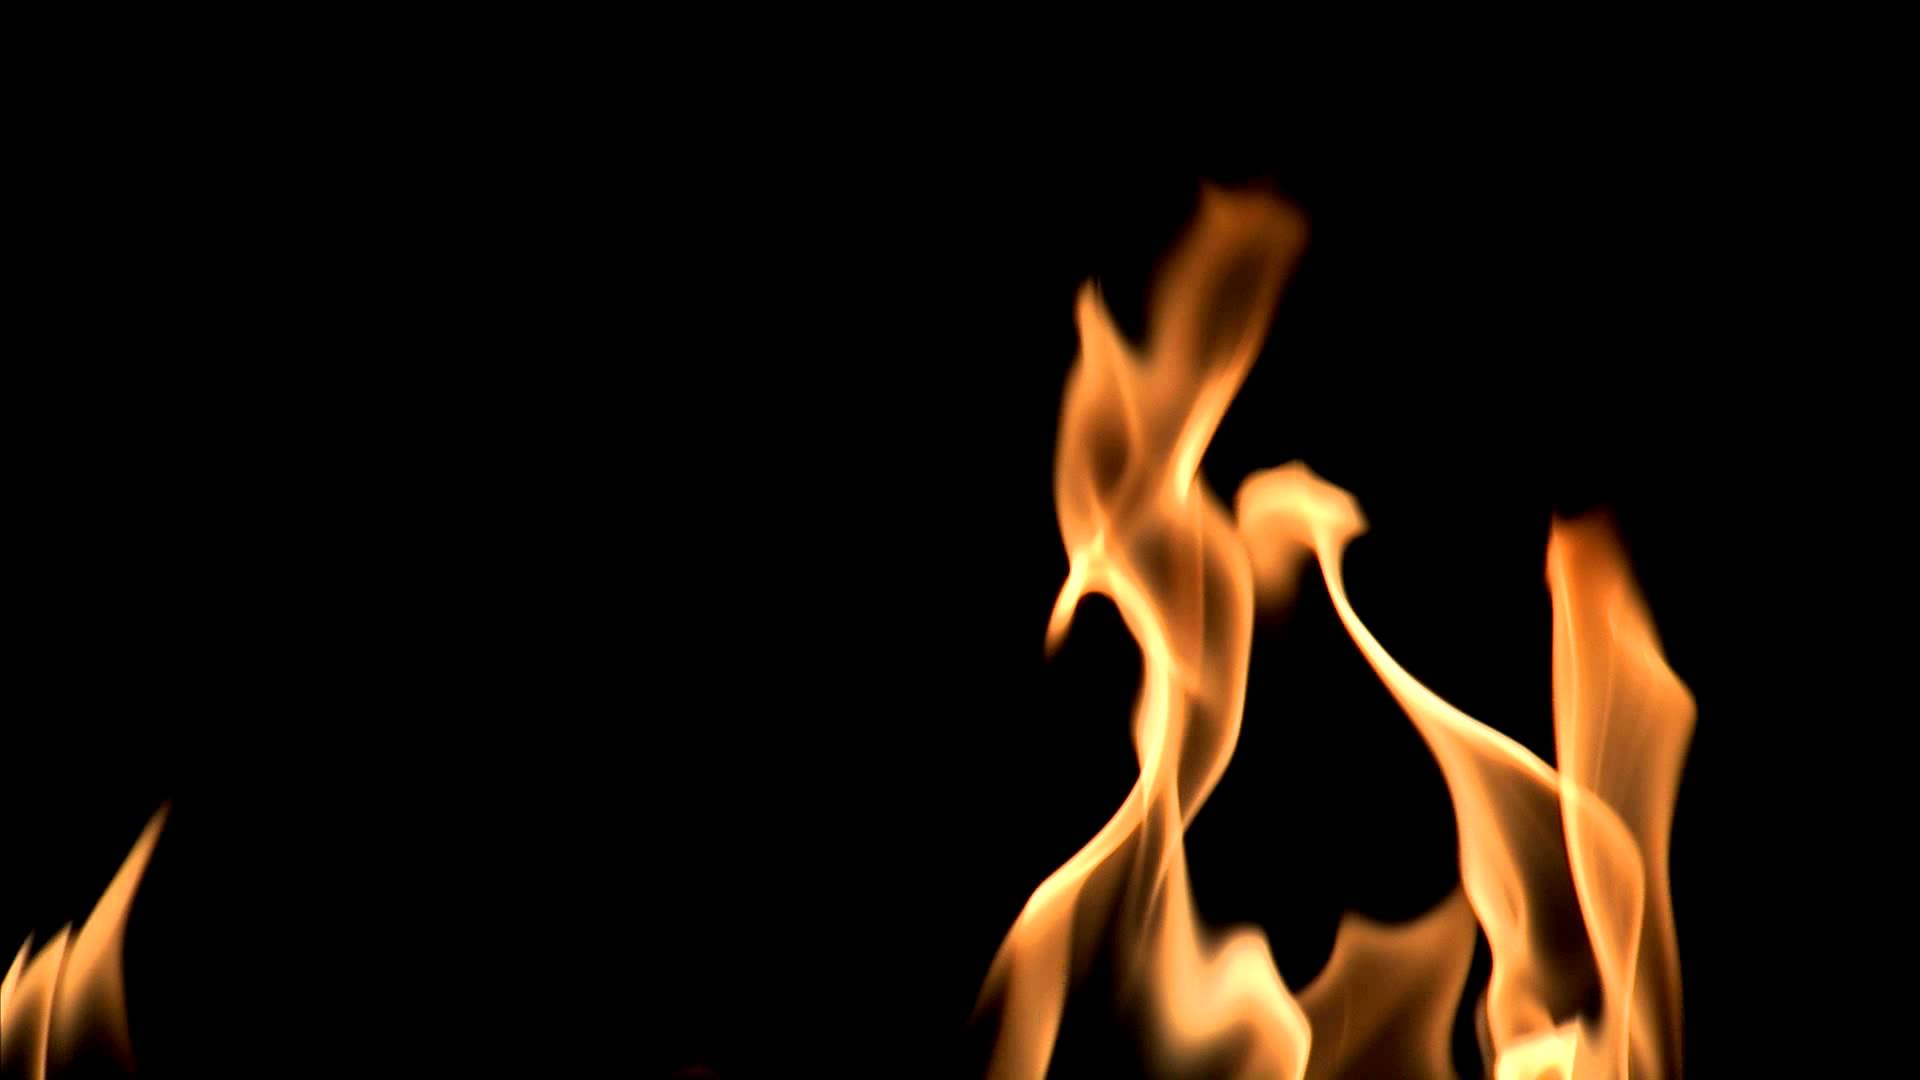 Low flames flickering with a black background